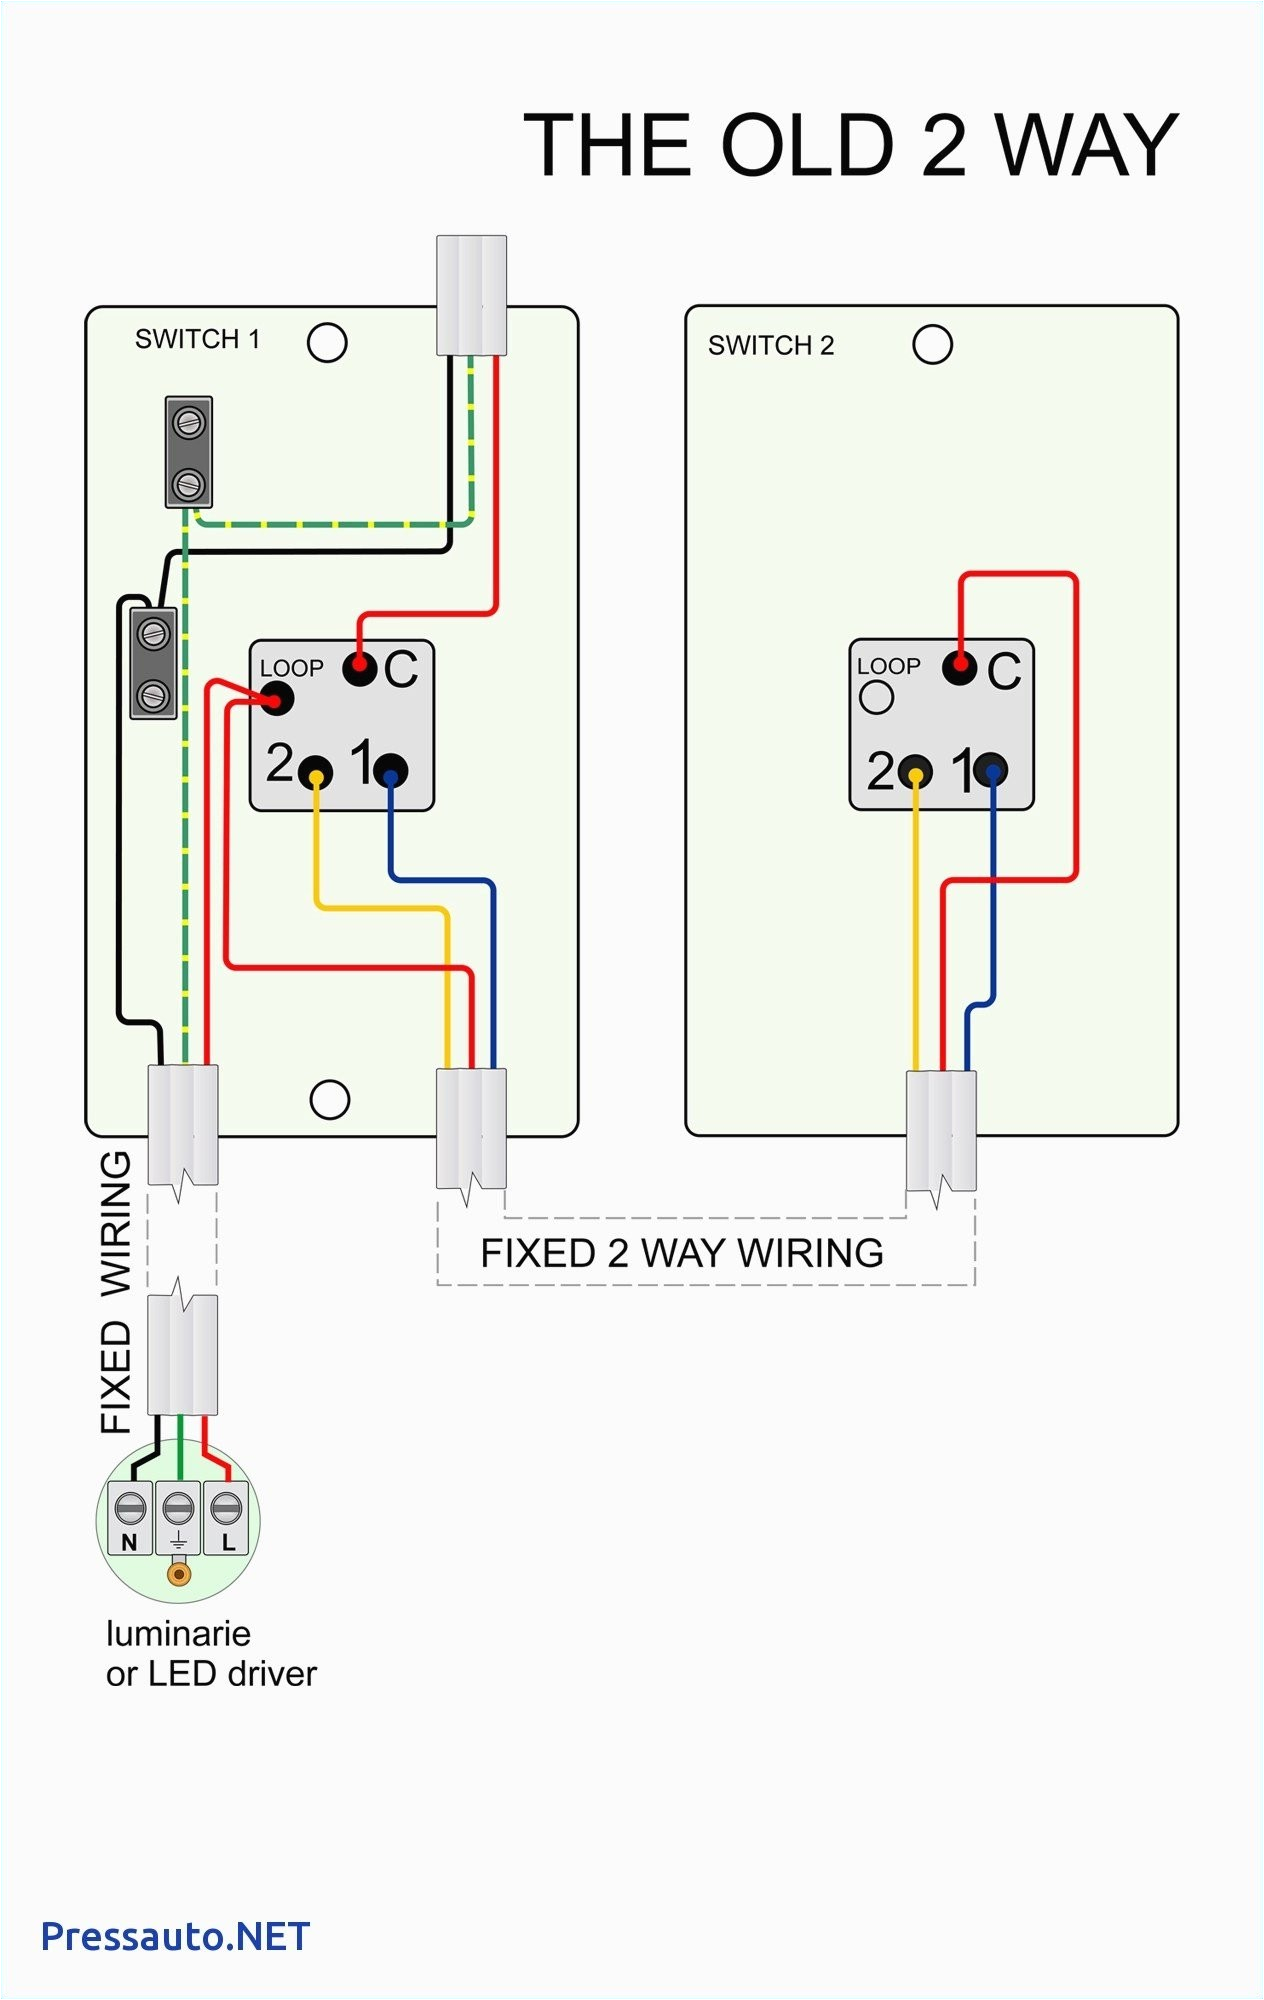 wiring diagram a light switch are new